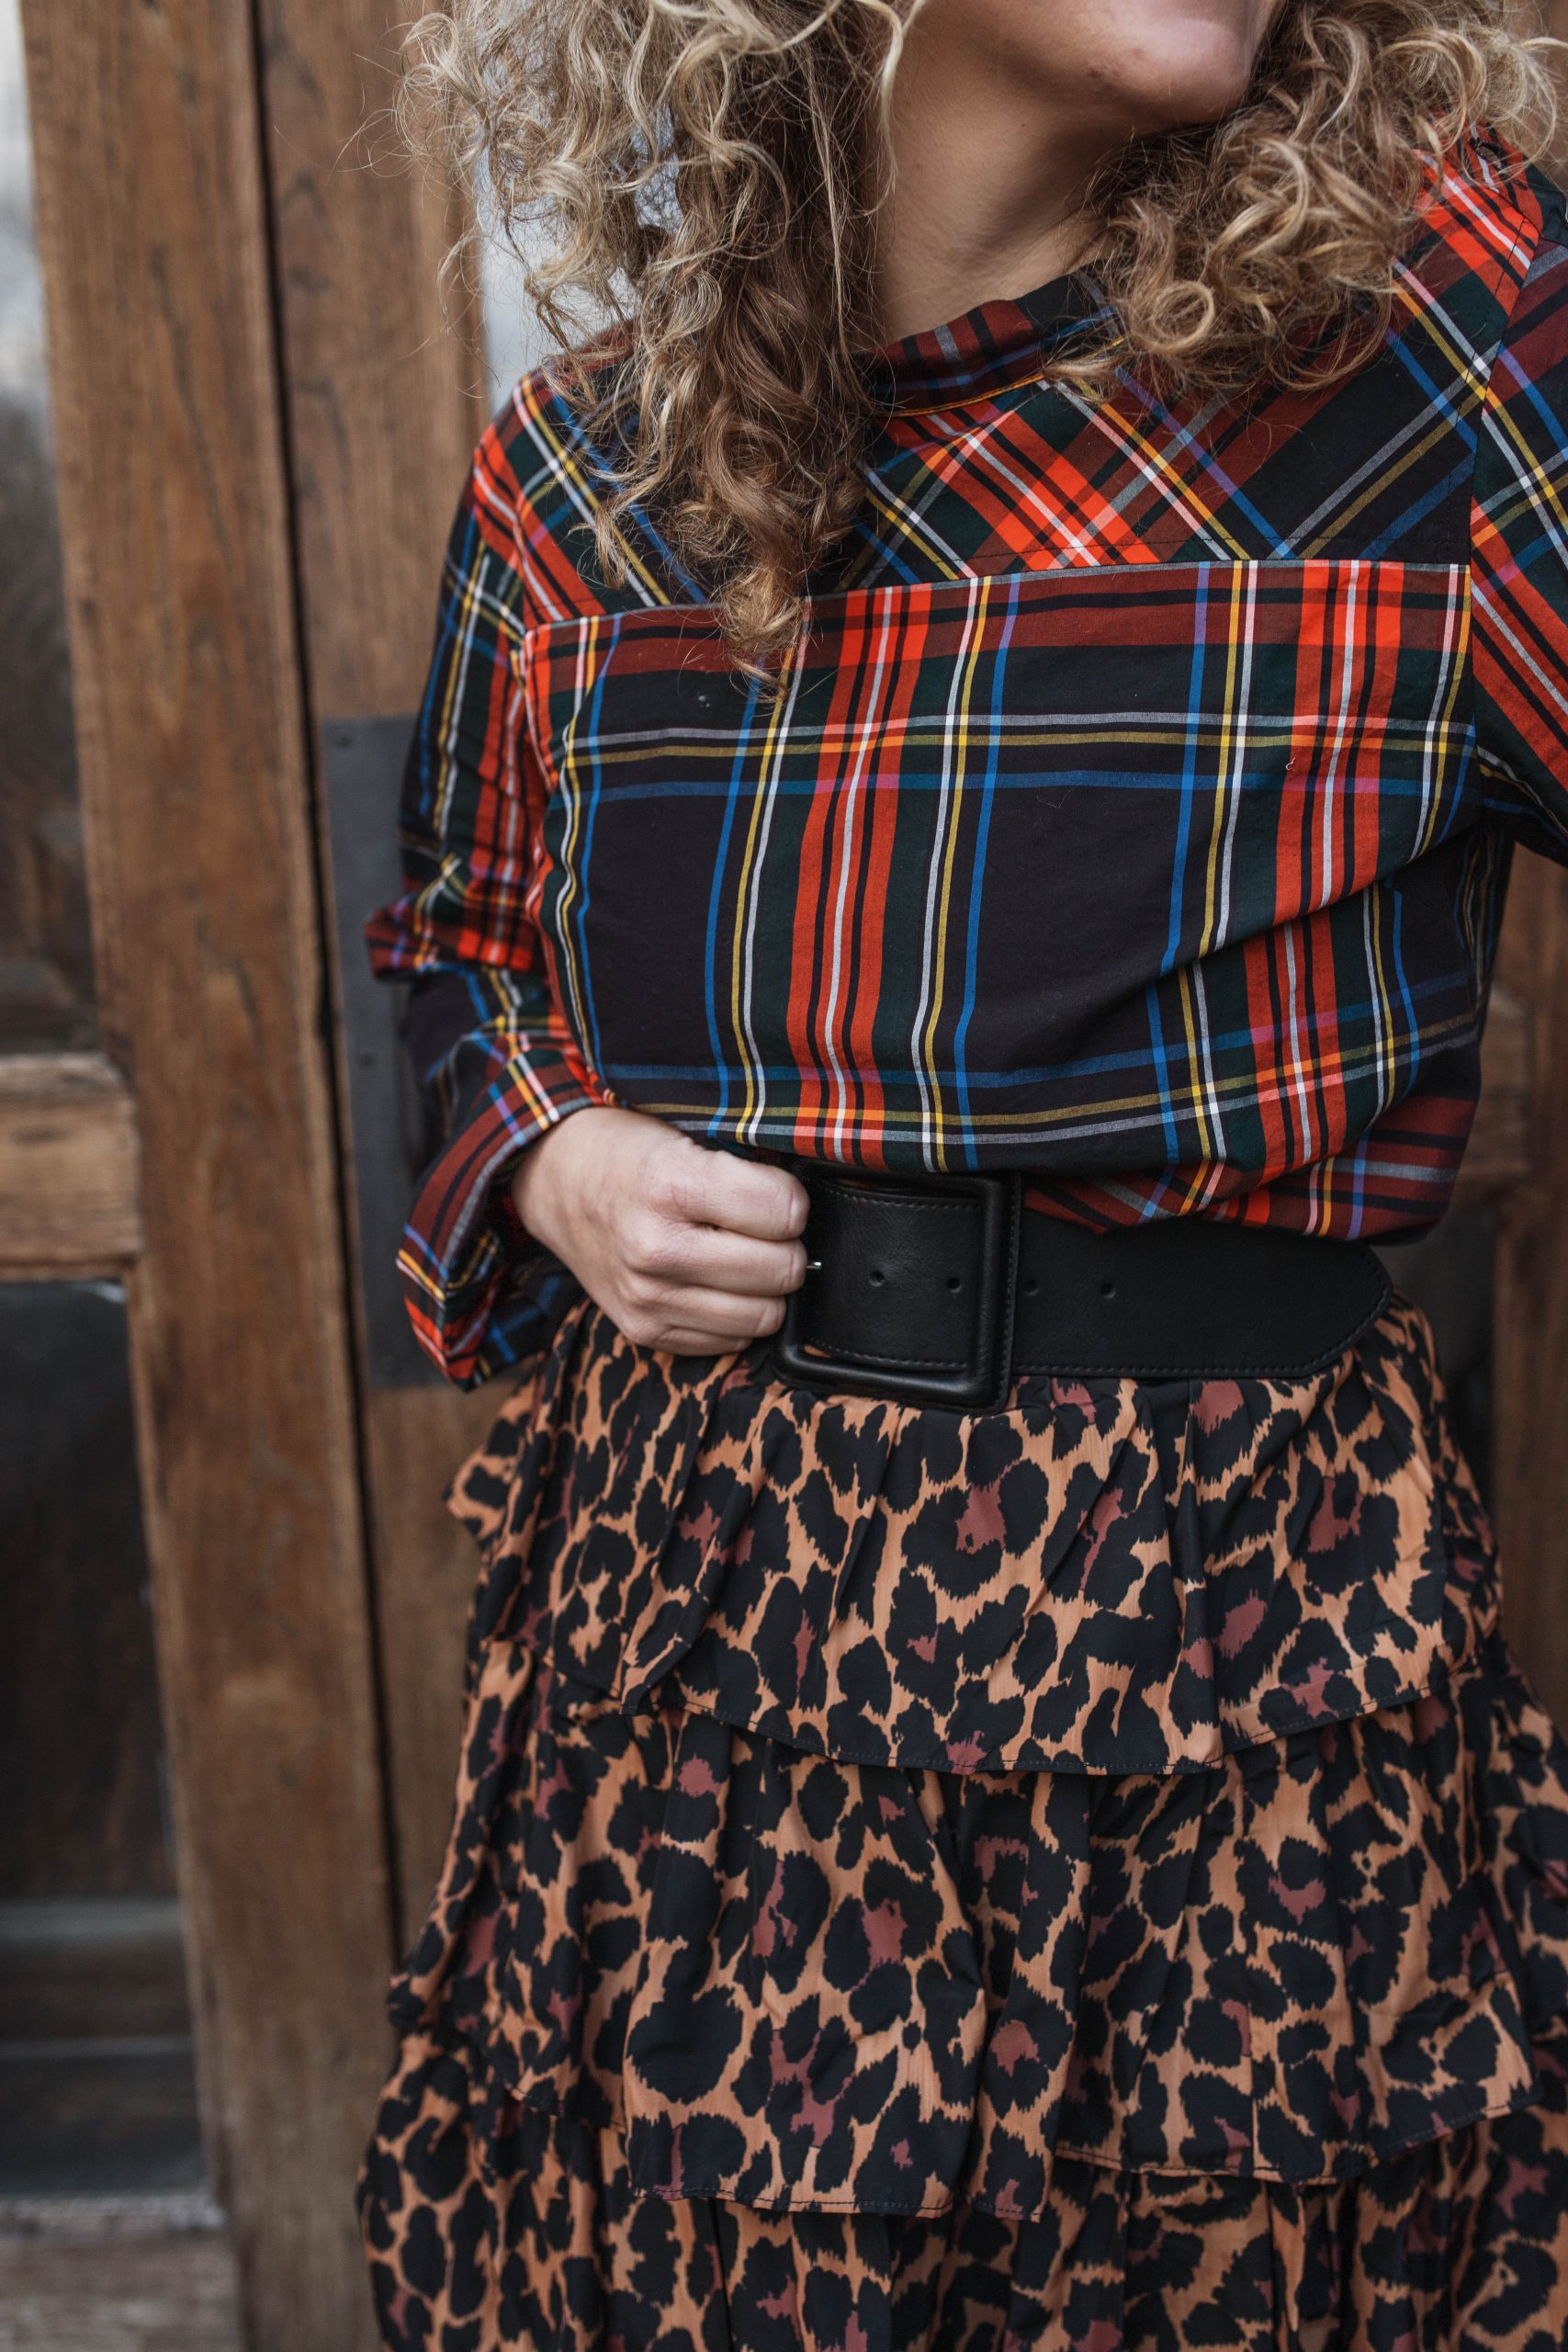 Plaid and leopard Ruffle Jcrew Skirt with black belt